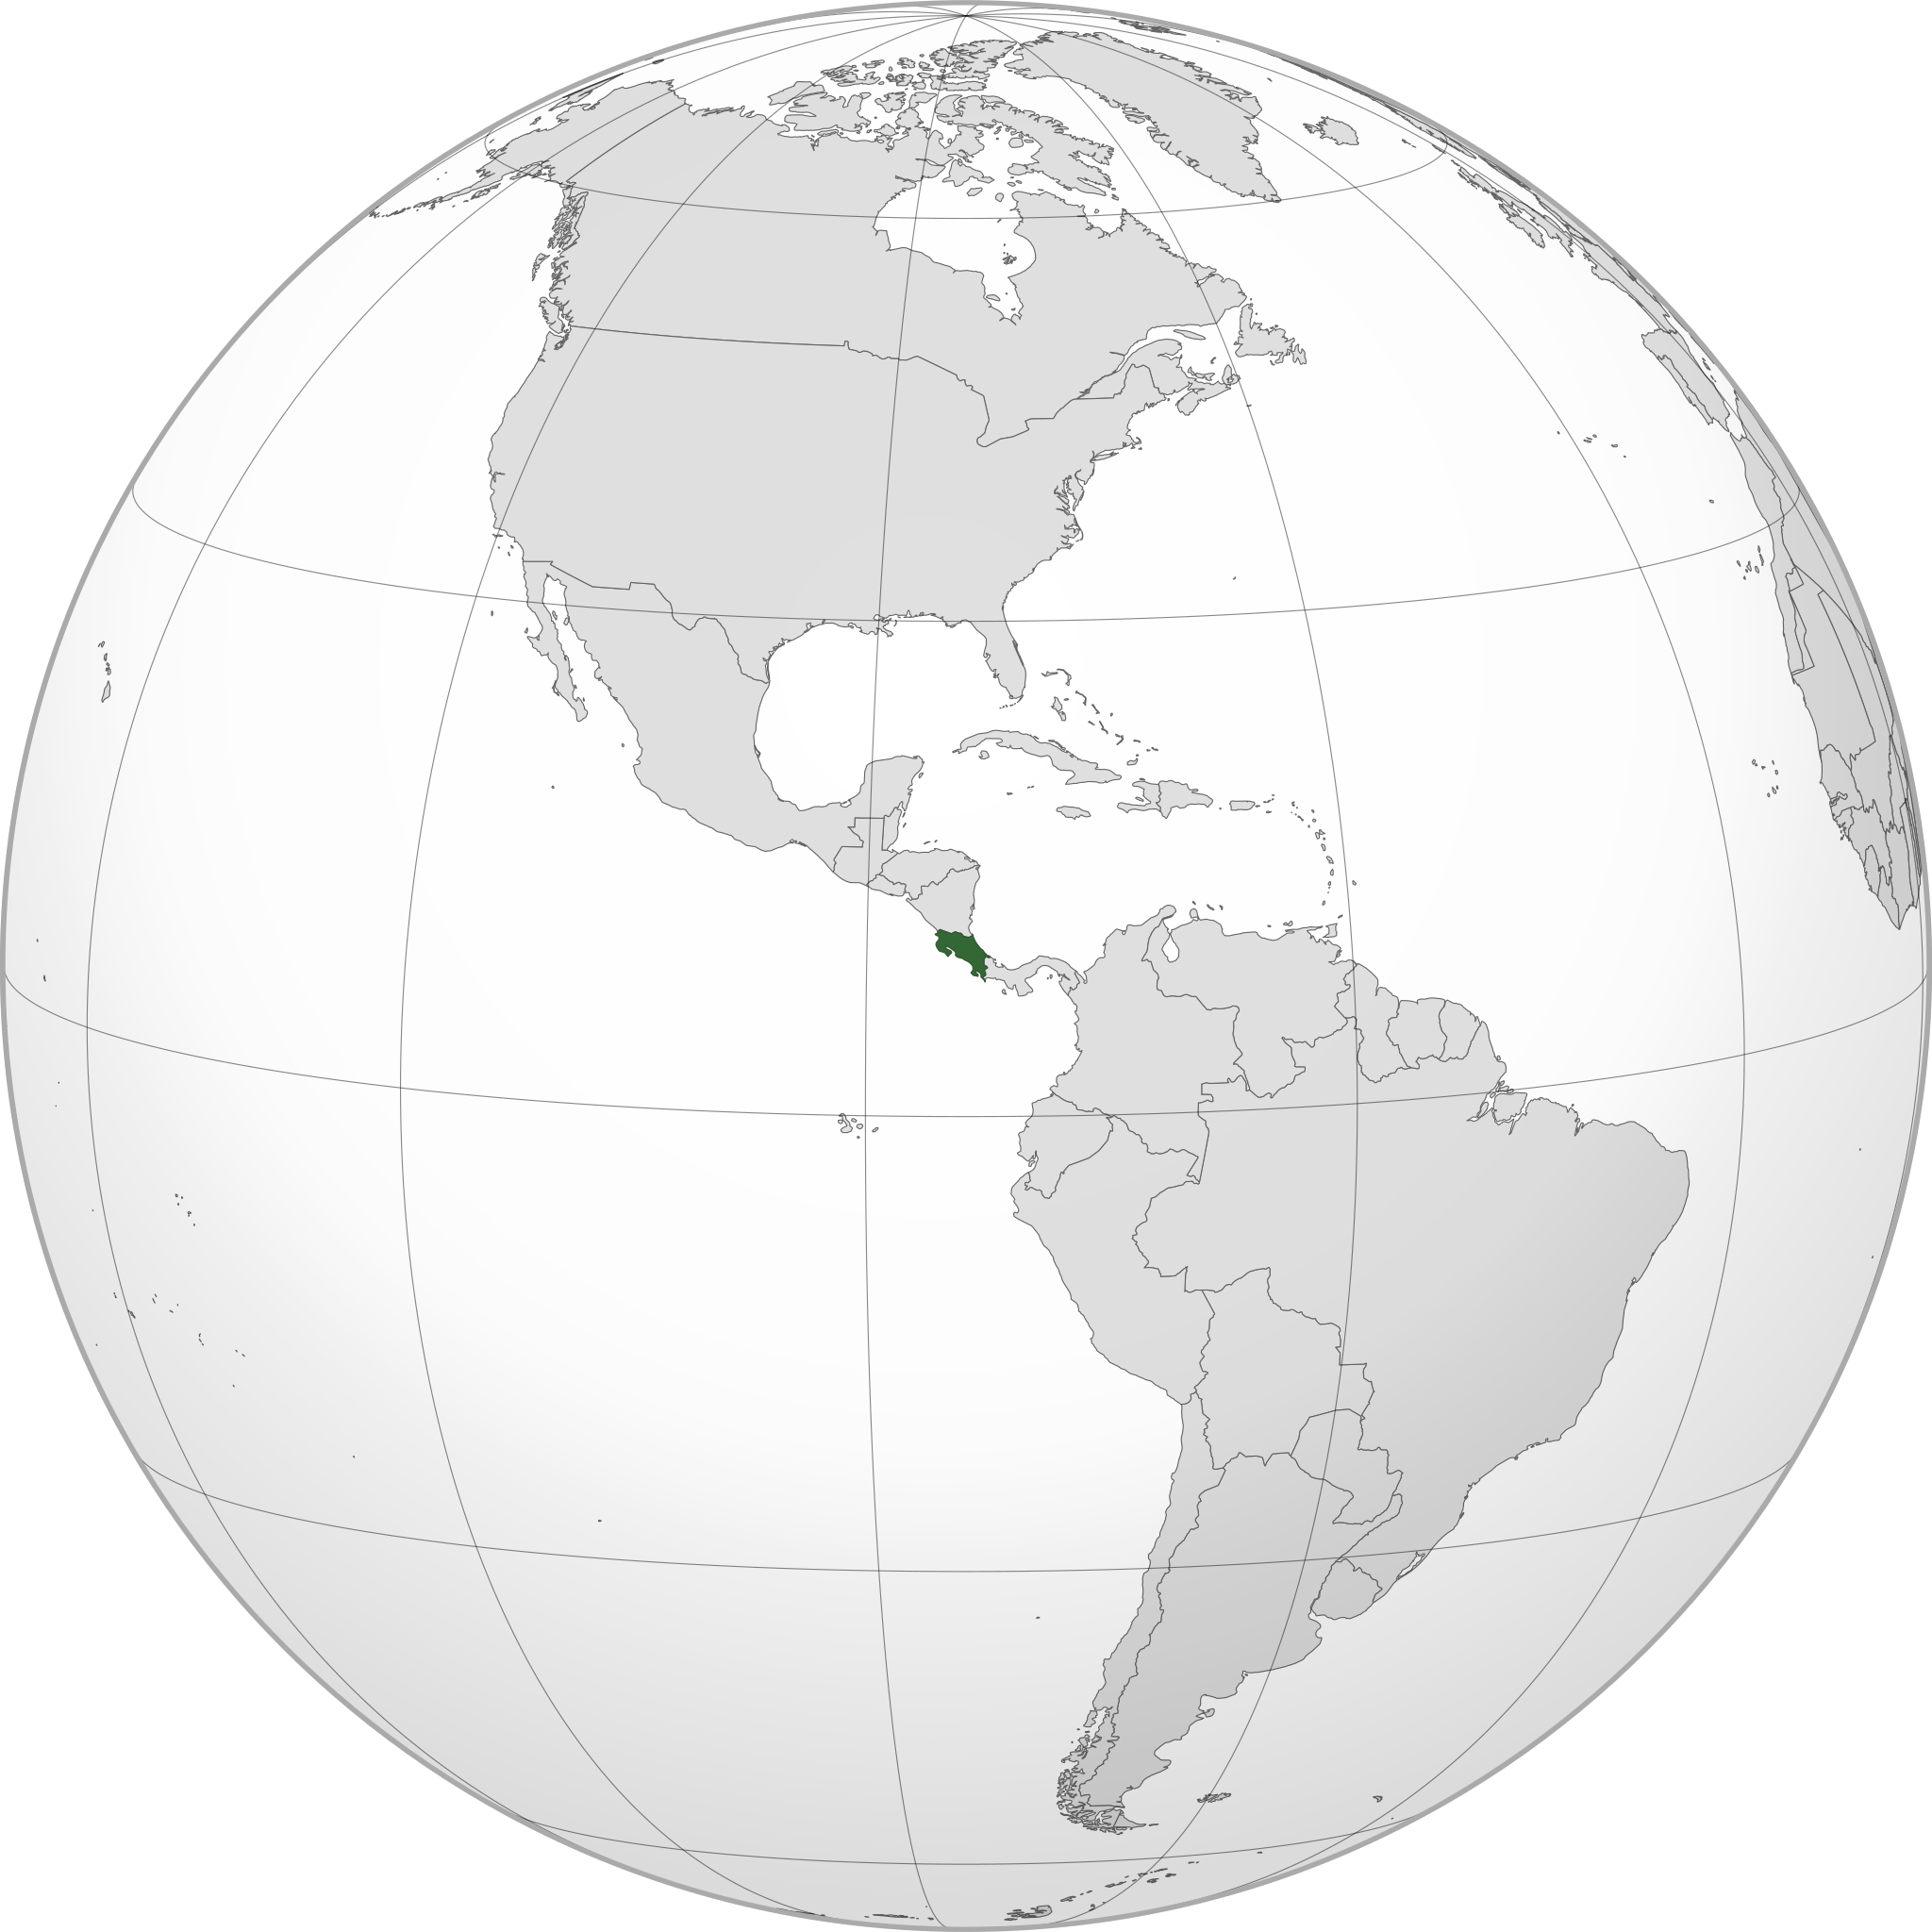 File:Costa Rica map.png